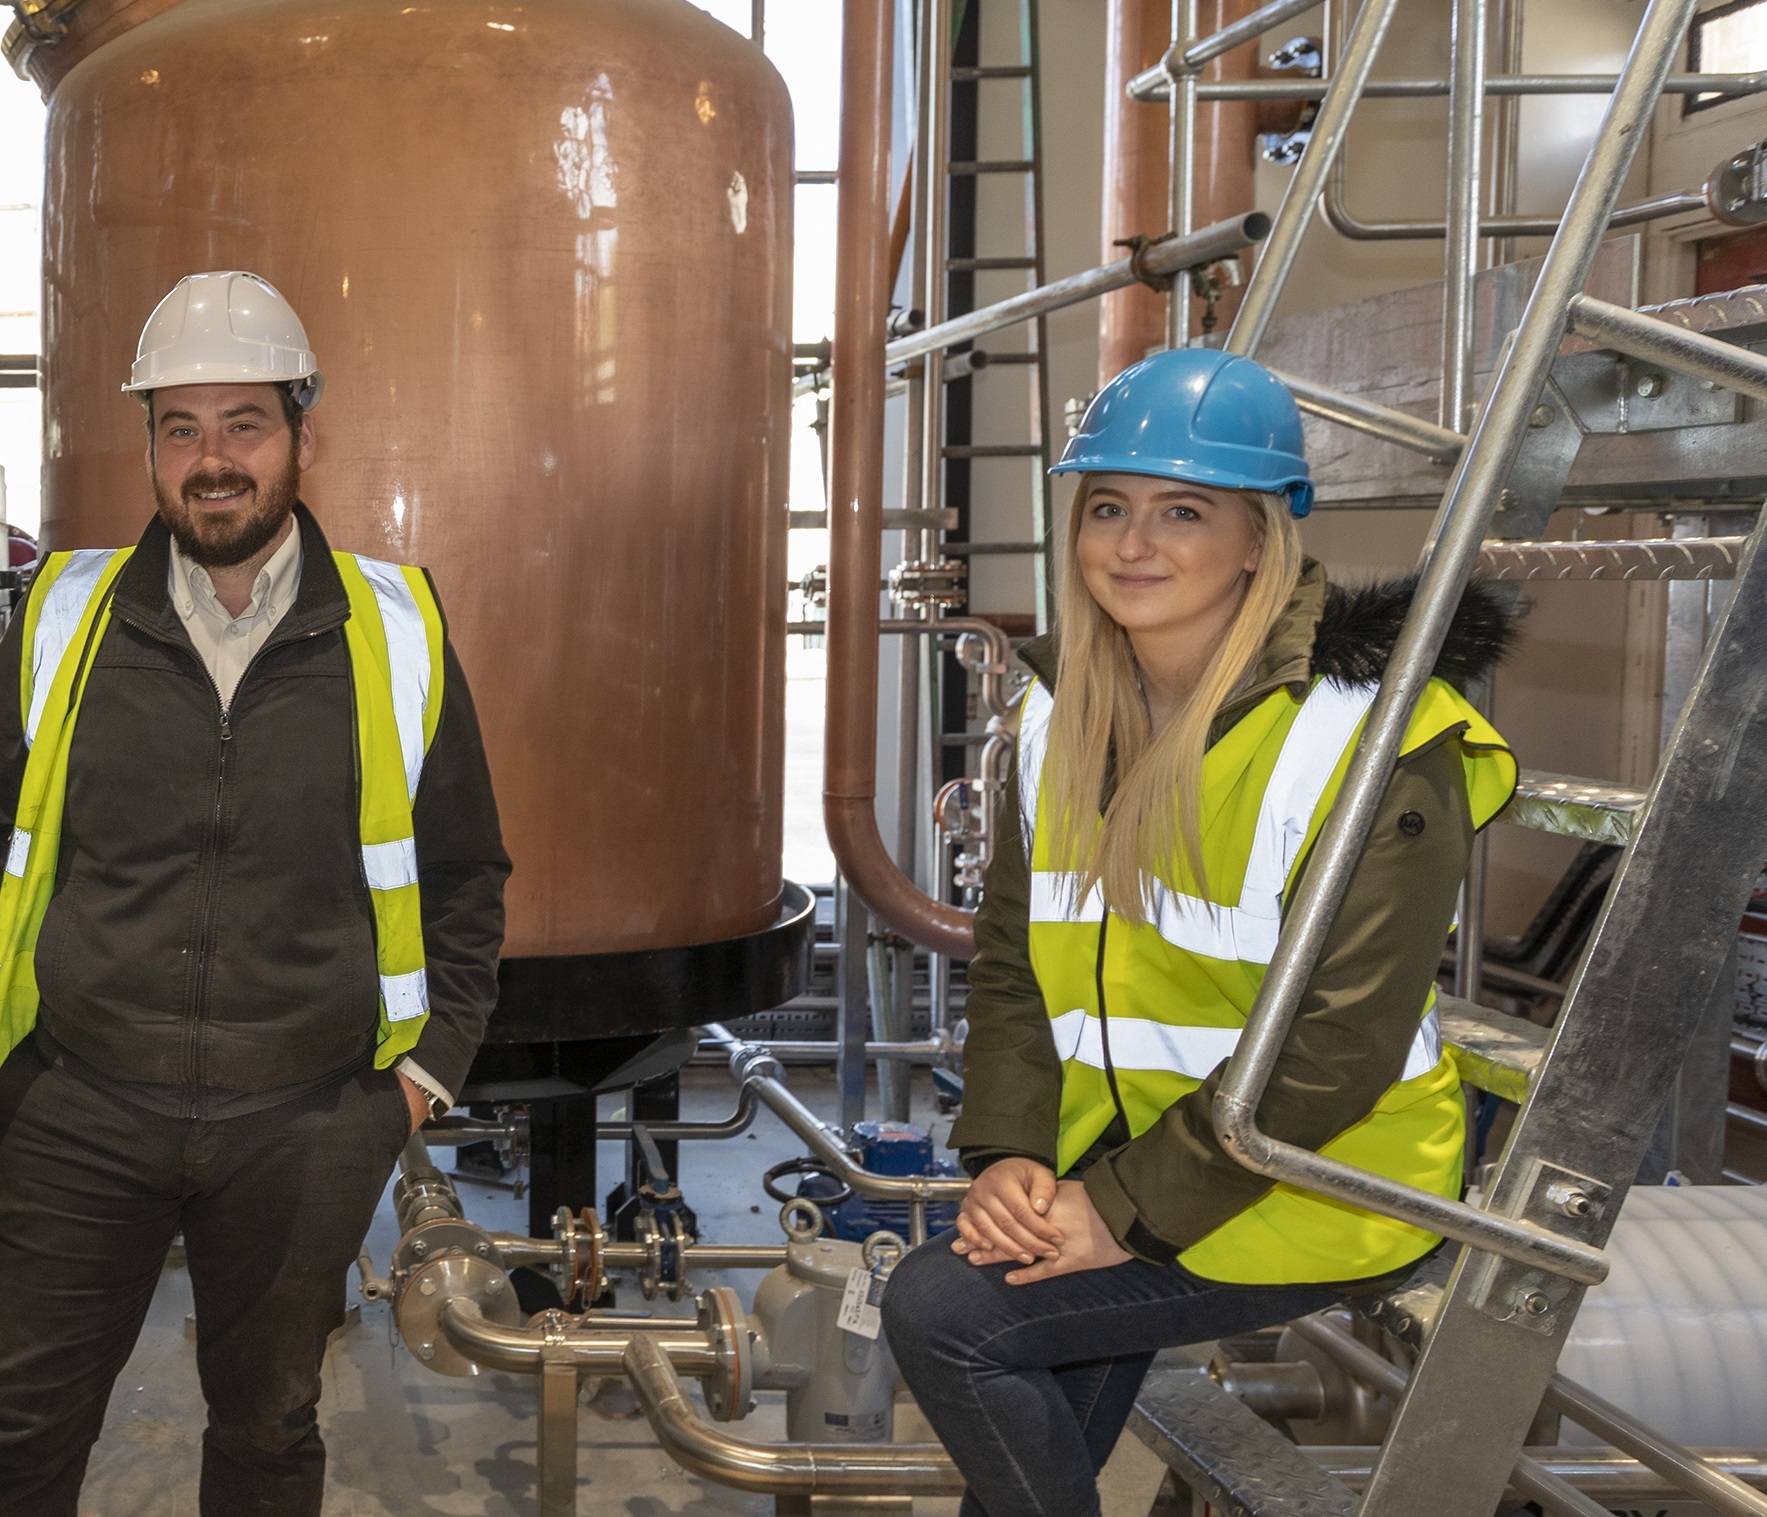 Dafydd Pesic-Smith, Penrhyn Distillery site manager, and Bethan Morgan, commissioning distiller. Picture: Graham Hembrough